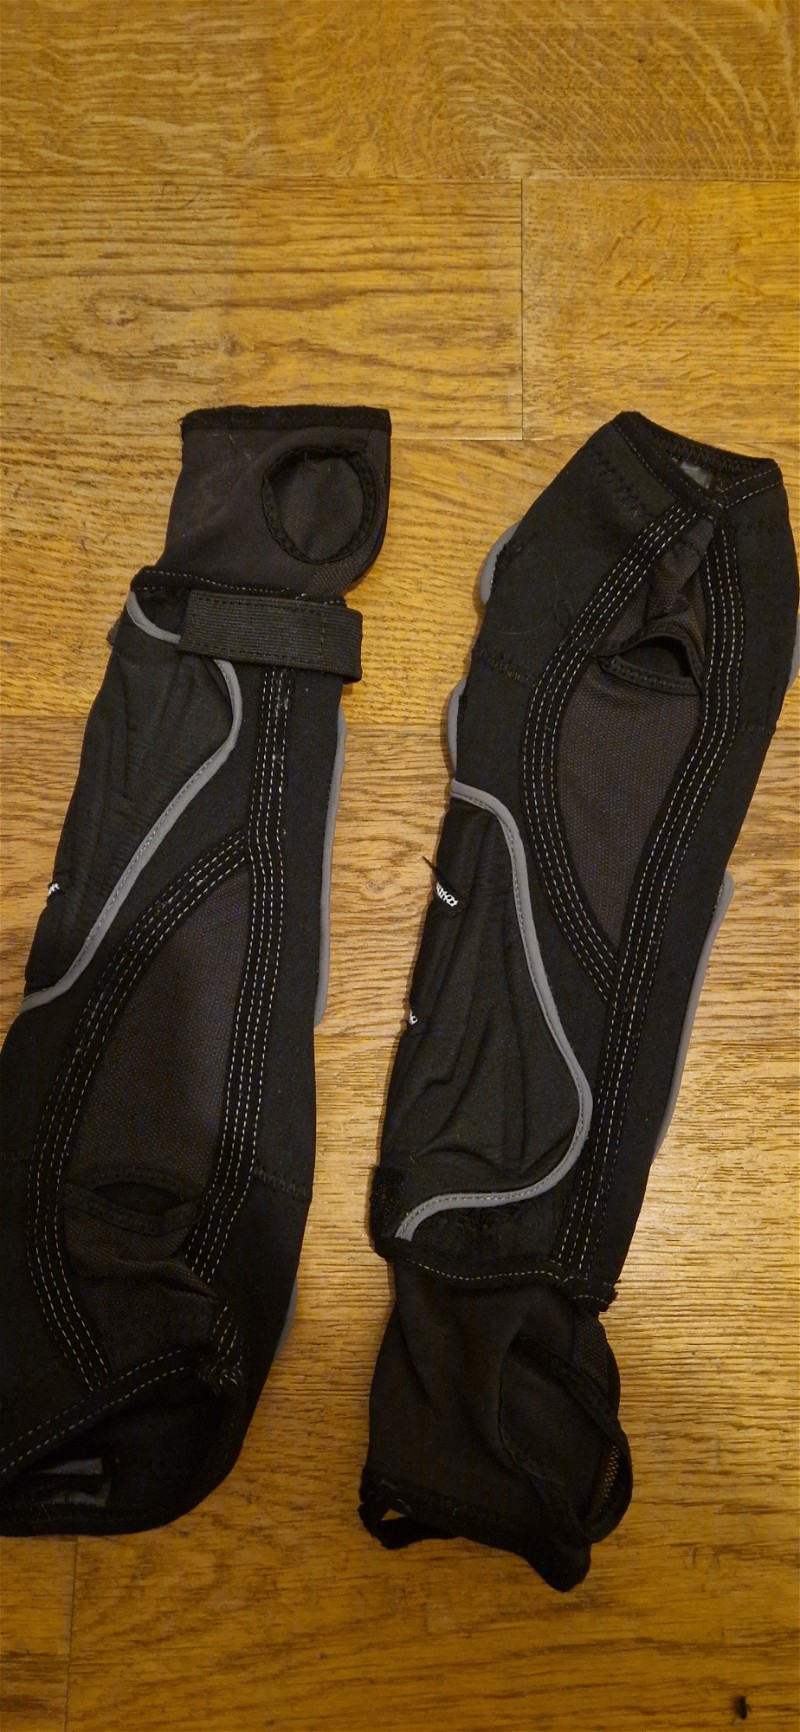 Image 1 for Dye Elbow Pads